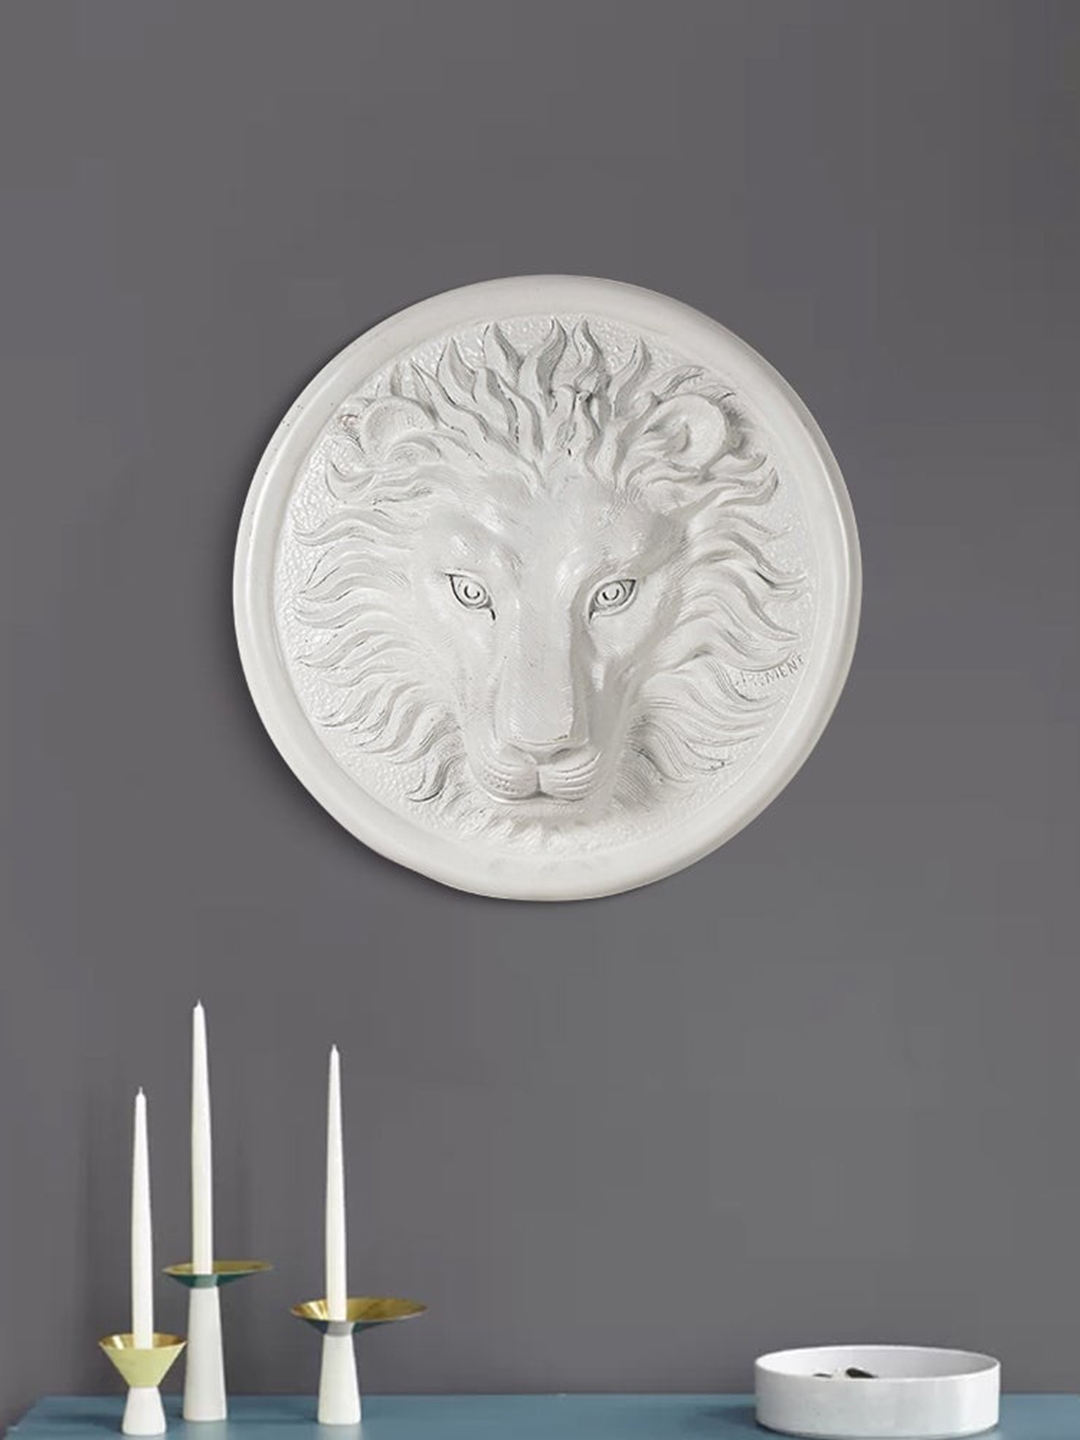 THE ARTMENT White Surreal Lion Head Wall Art